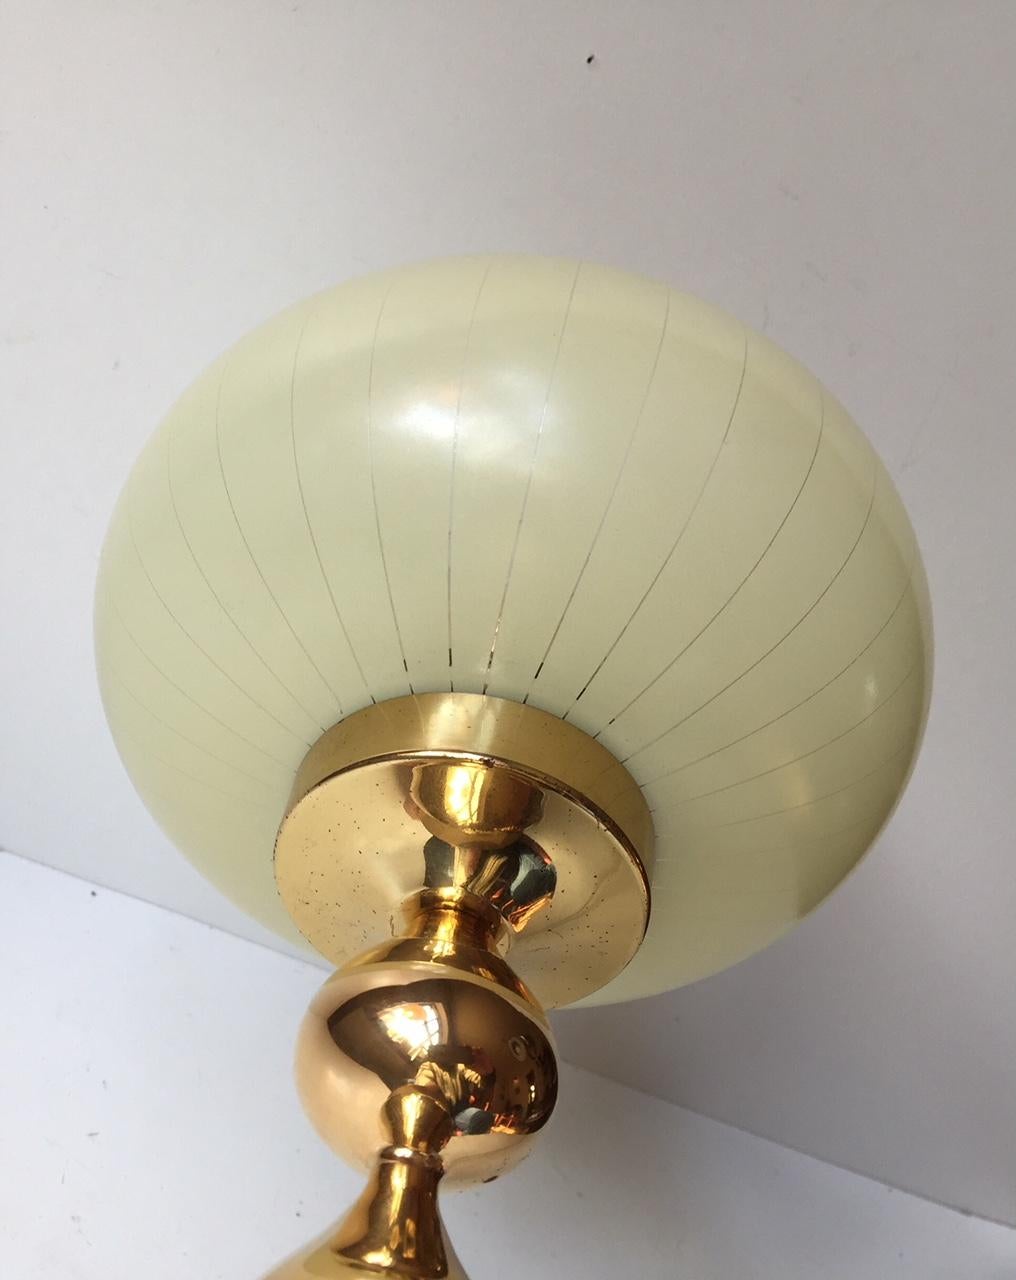 Danish Midcentury 24-Carat Gold-Plated Table Lamp by Hugo Asmussen, 1960s